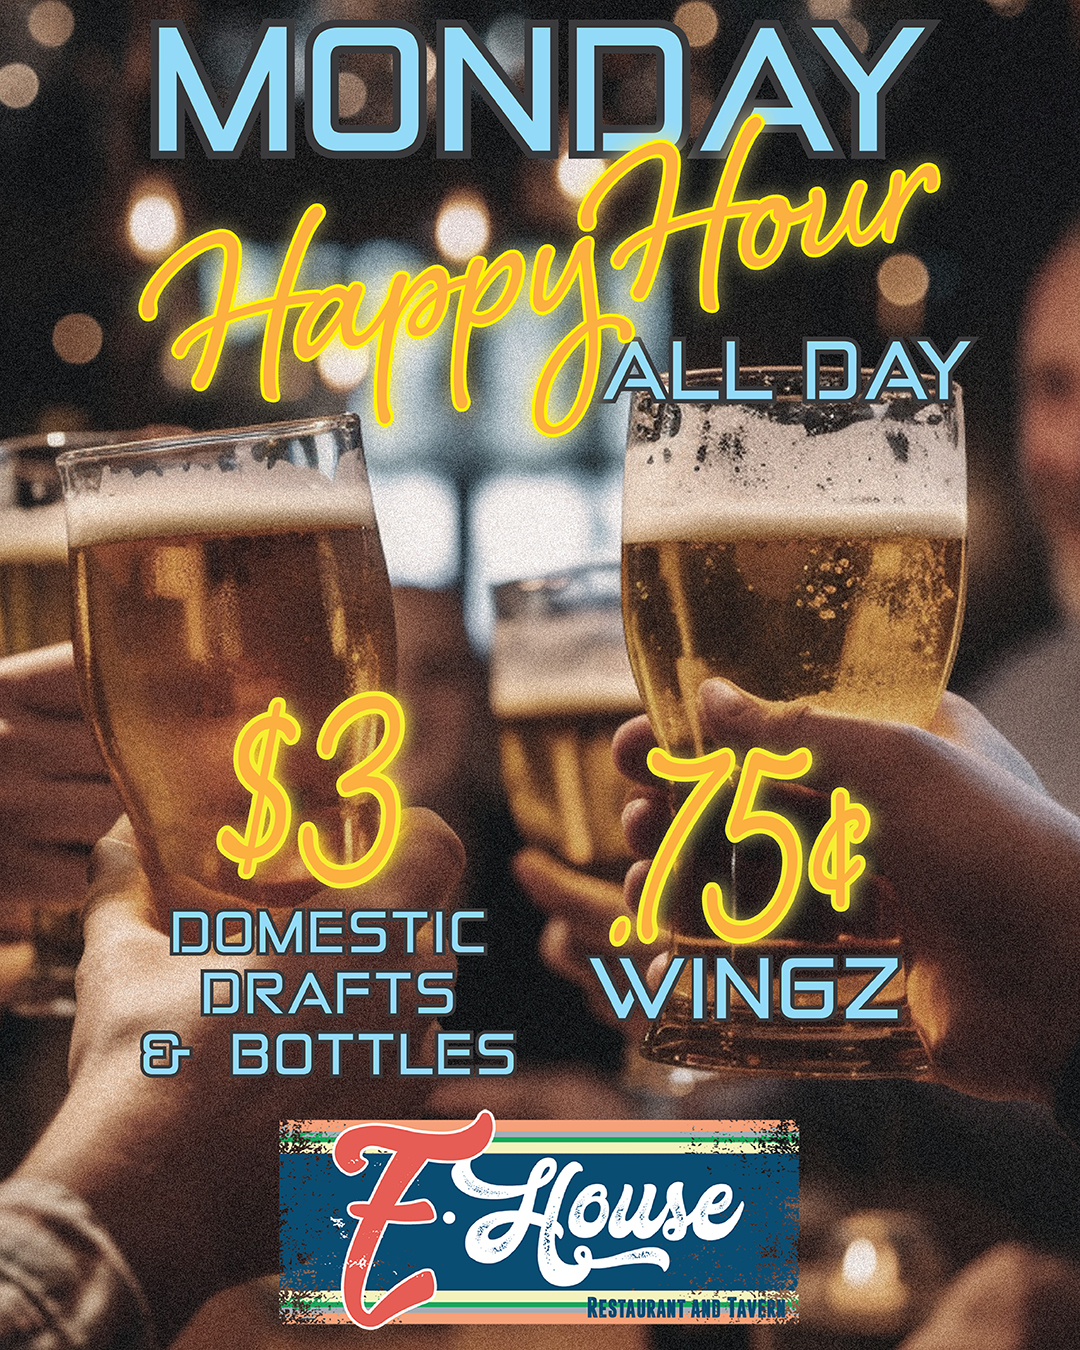 Image featuring text advertising Monday Happy Hour at E. House Restaurant and Tavern with $3 domestic drafts and bottles, and 75¢ wings. Background shows people clinking glasses of beer.